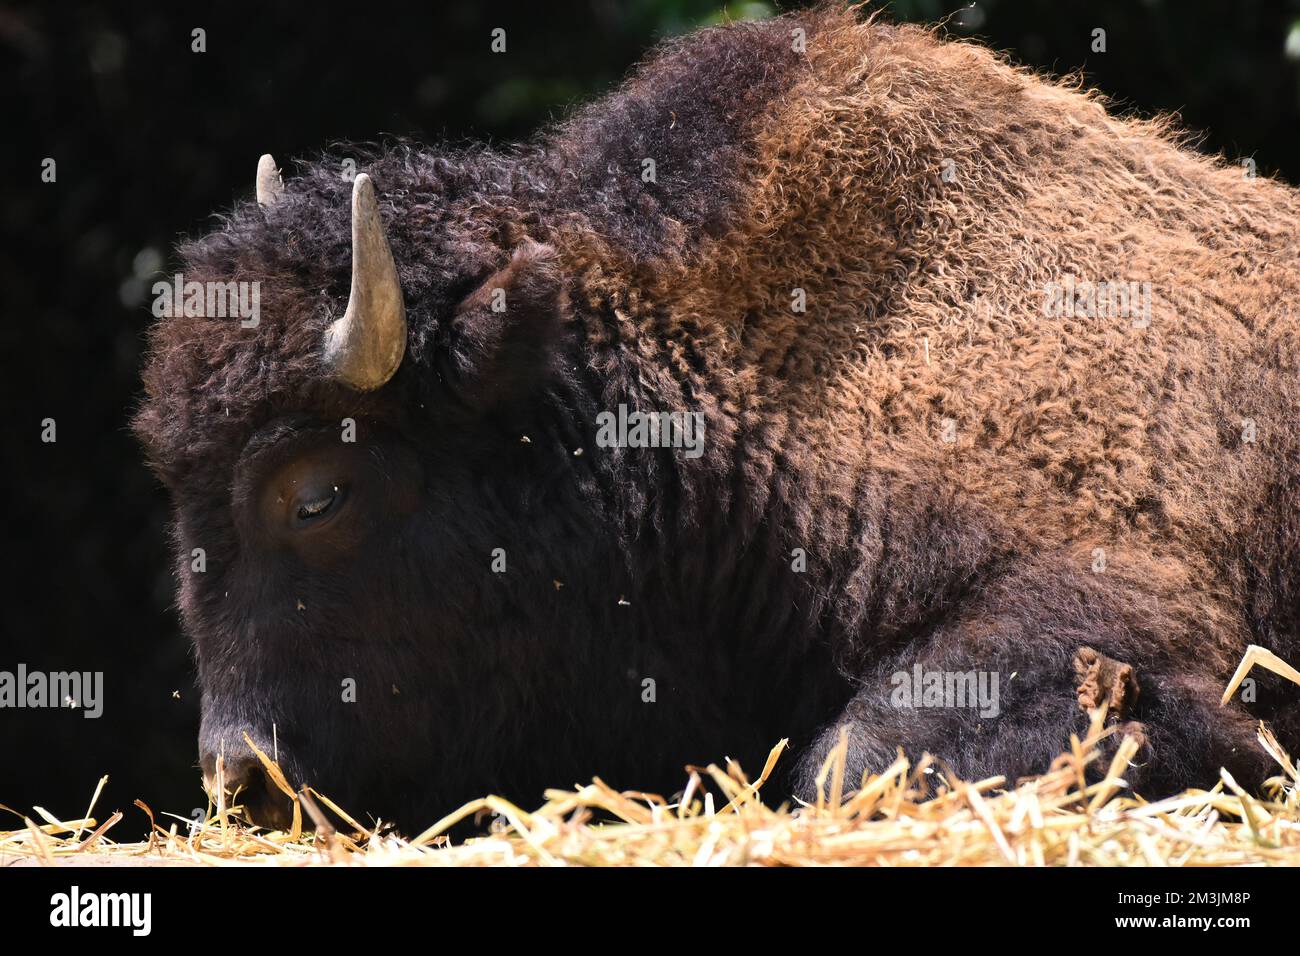 An American Bison species  seen in its habitat during a species conservation program, the zoo has 1803 animals in captivity at Chapultepec Zoo. (Photo Stock Photo